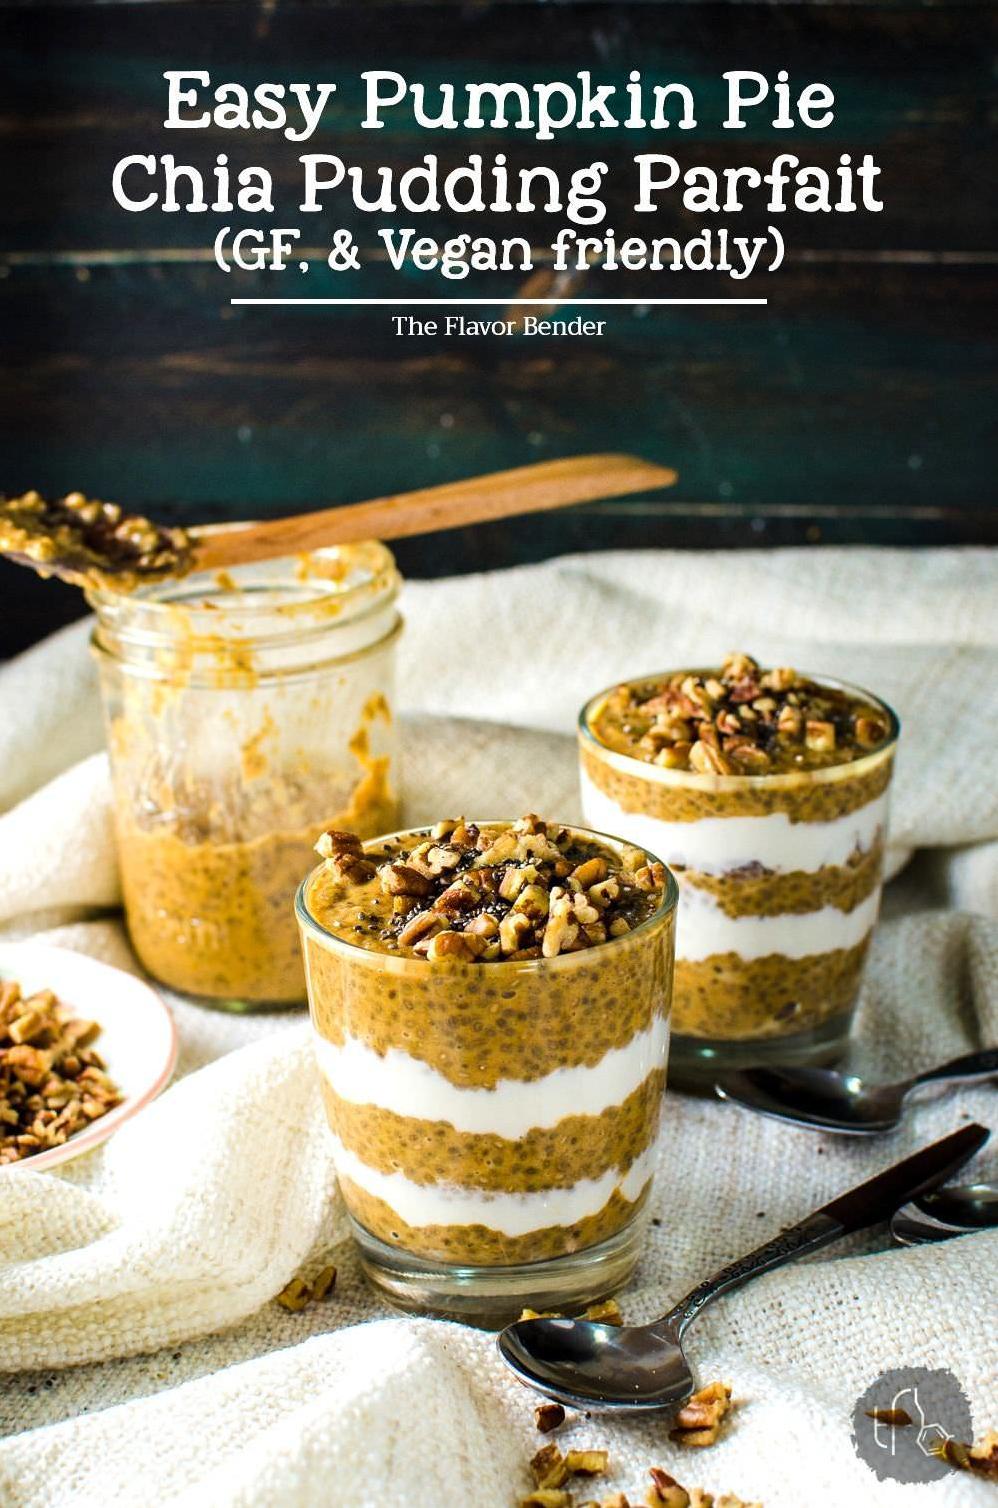  Crunchy chia seeds give this parfait an extra kick